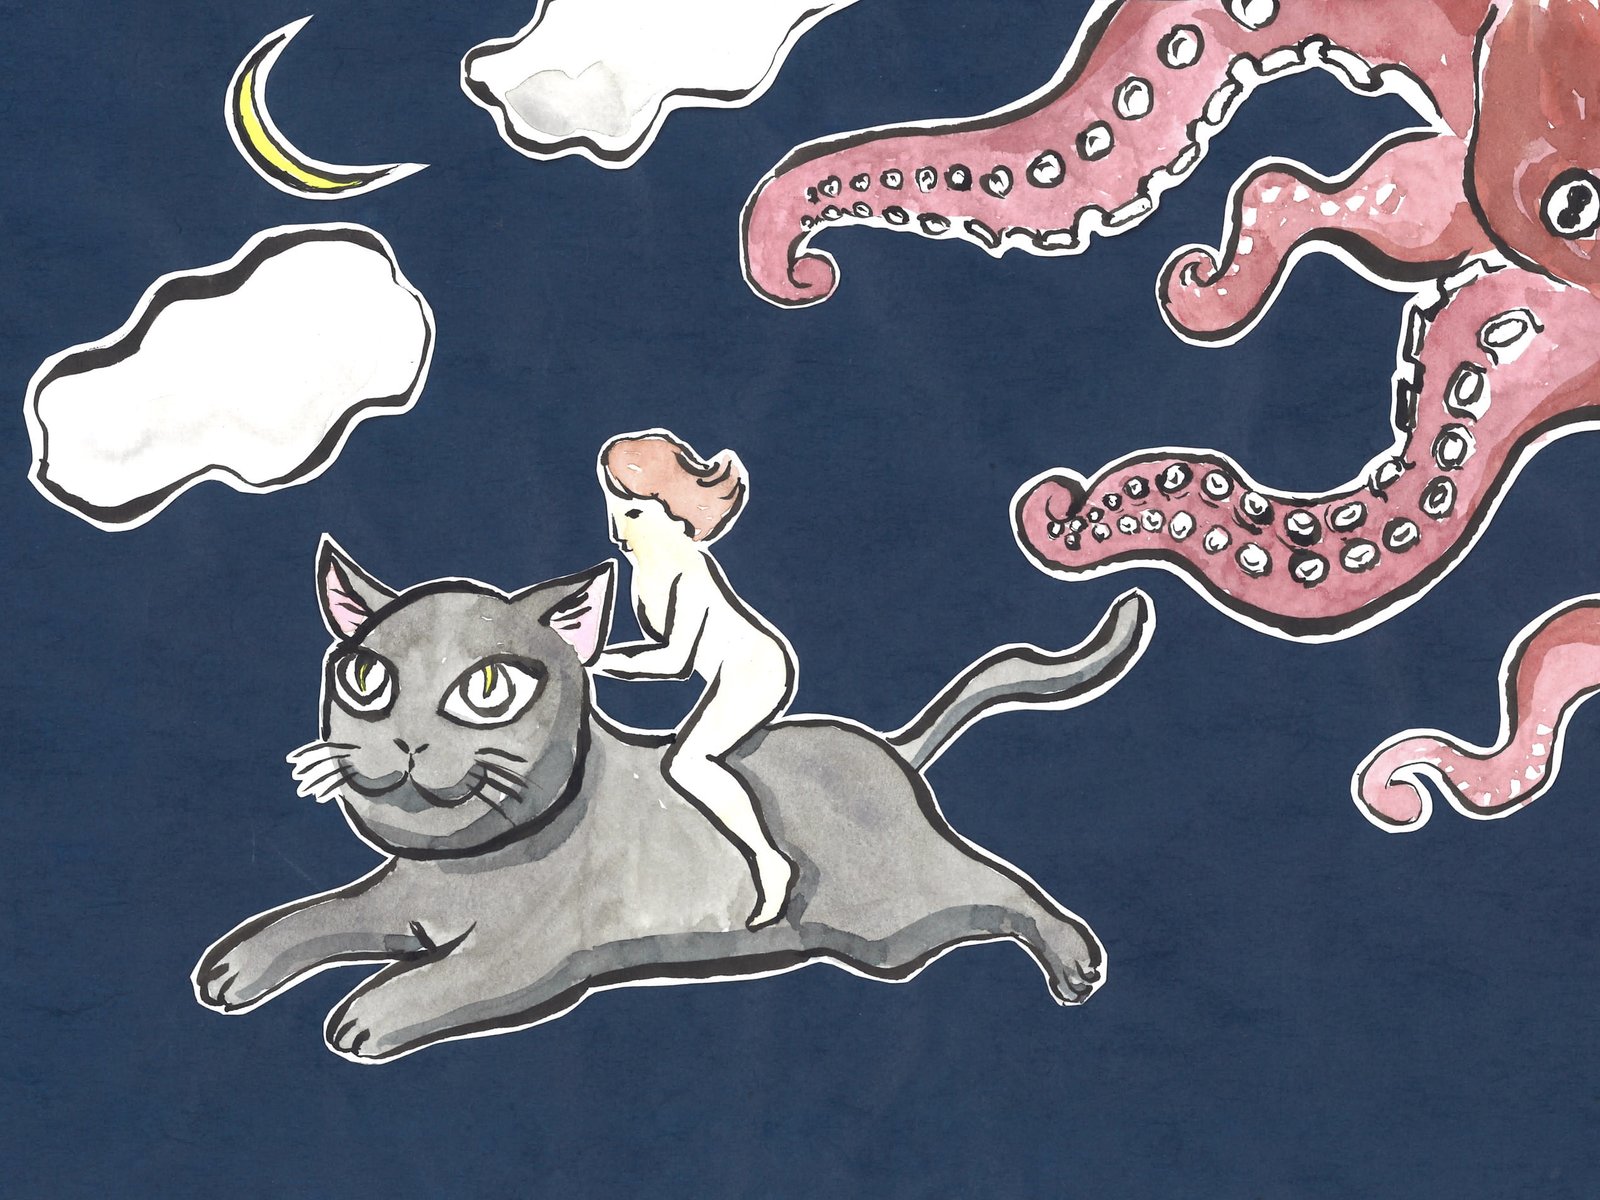 The Darkmoon Night Escape on the Cat’s Back from the Octopus’ Attack by Sung Lee